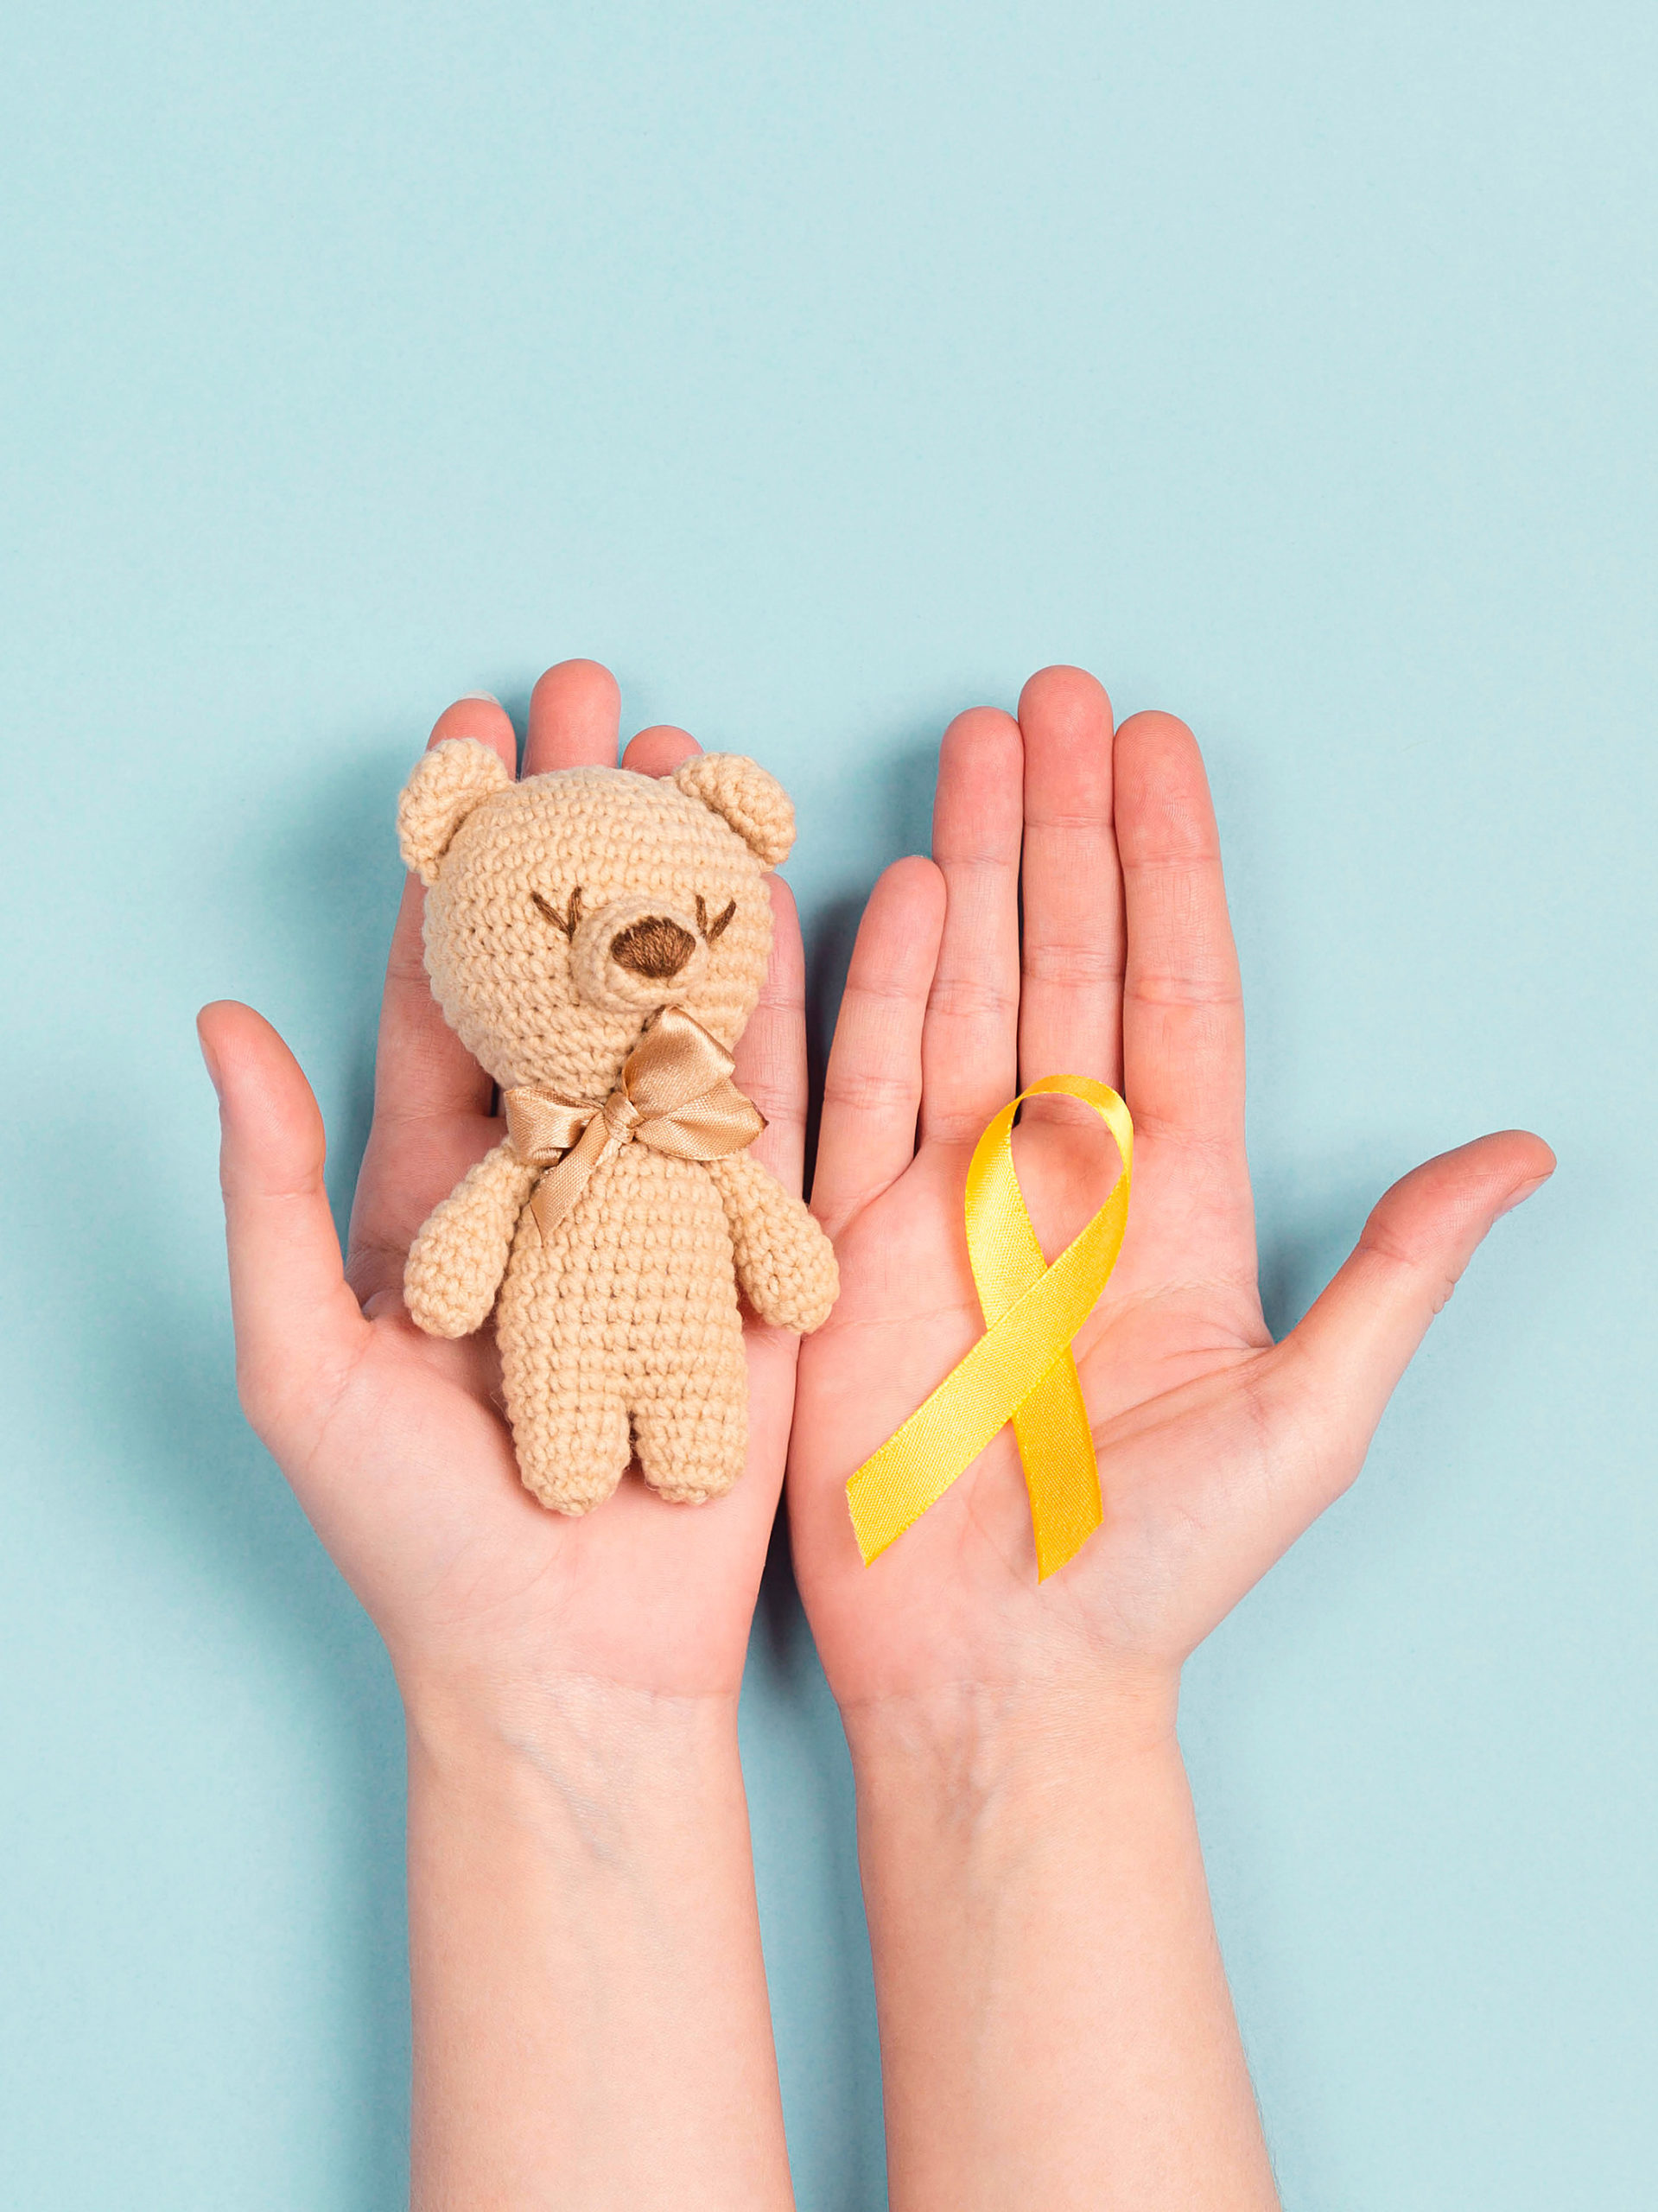 girl's hands outstretched holding a yellow ribbon and small teddy bear